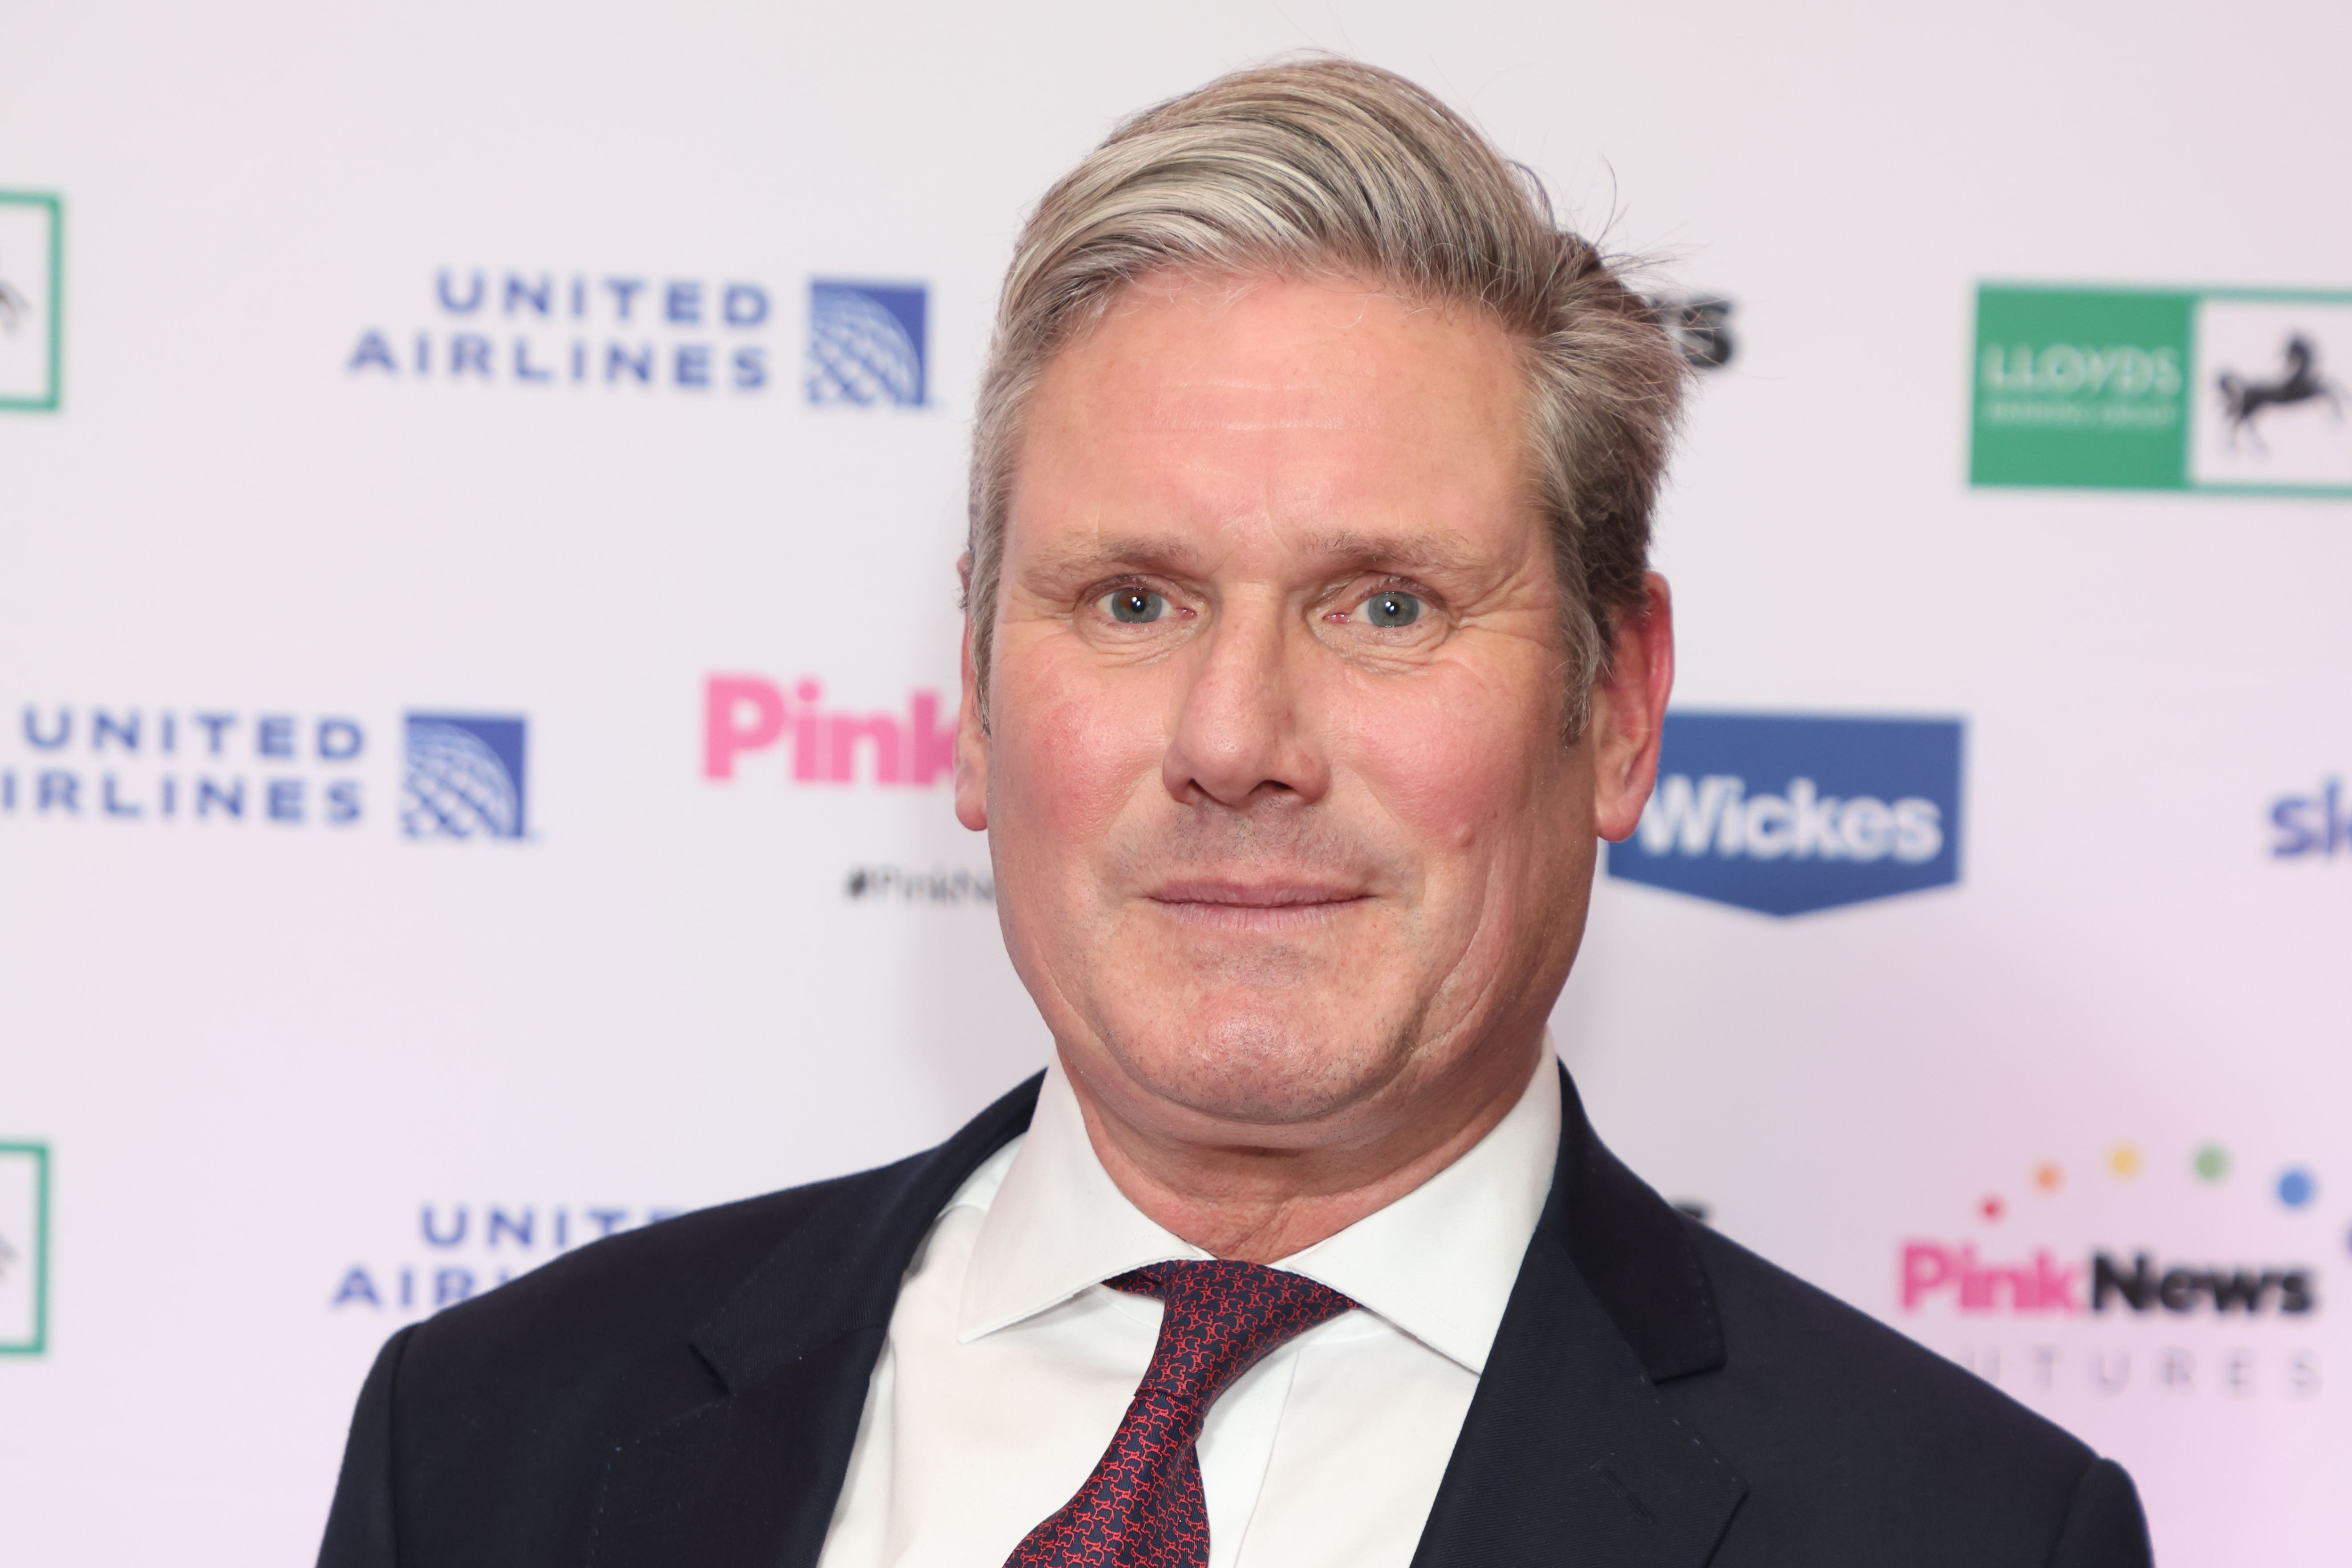 Sir Keir Starmer attending the PinkNews Awards (Suzan Moore/PA)